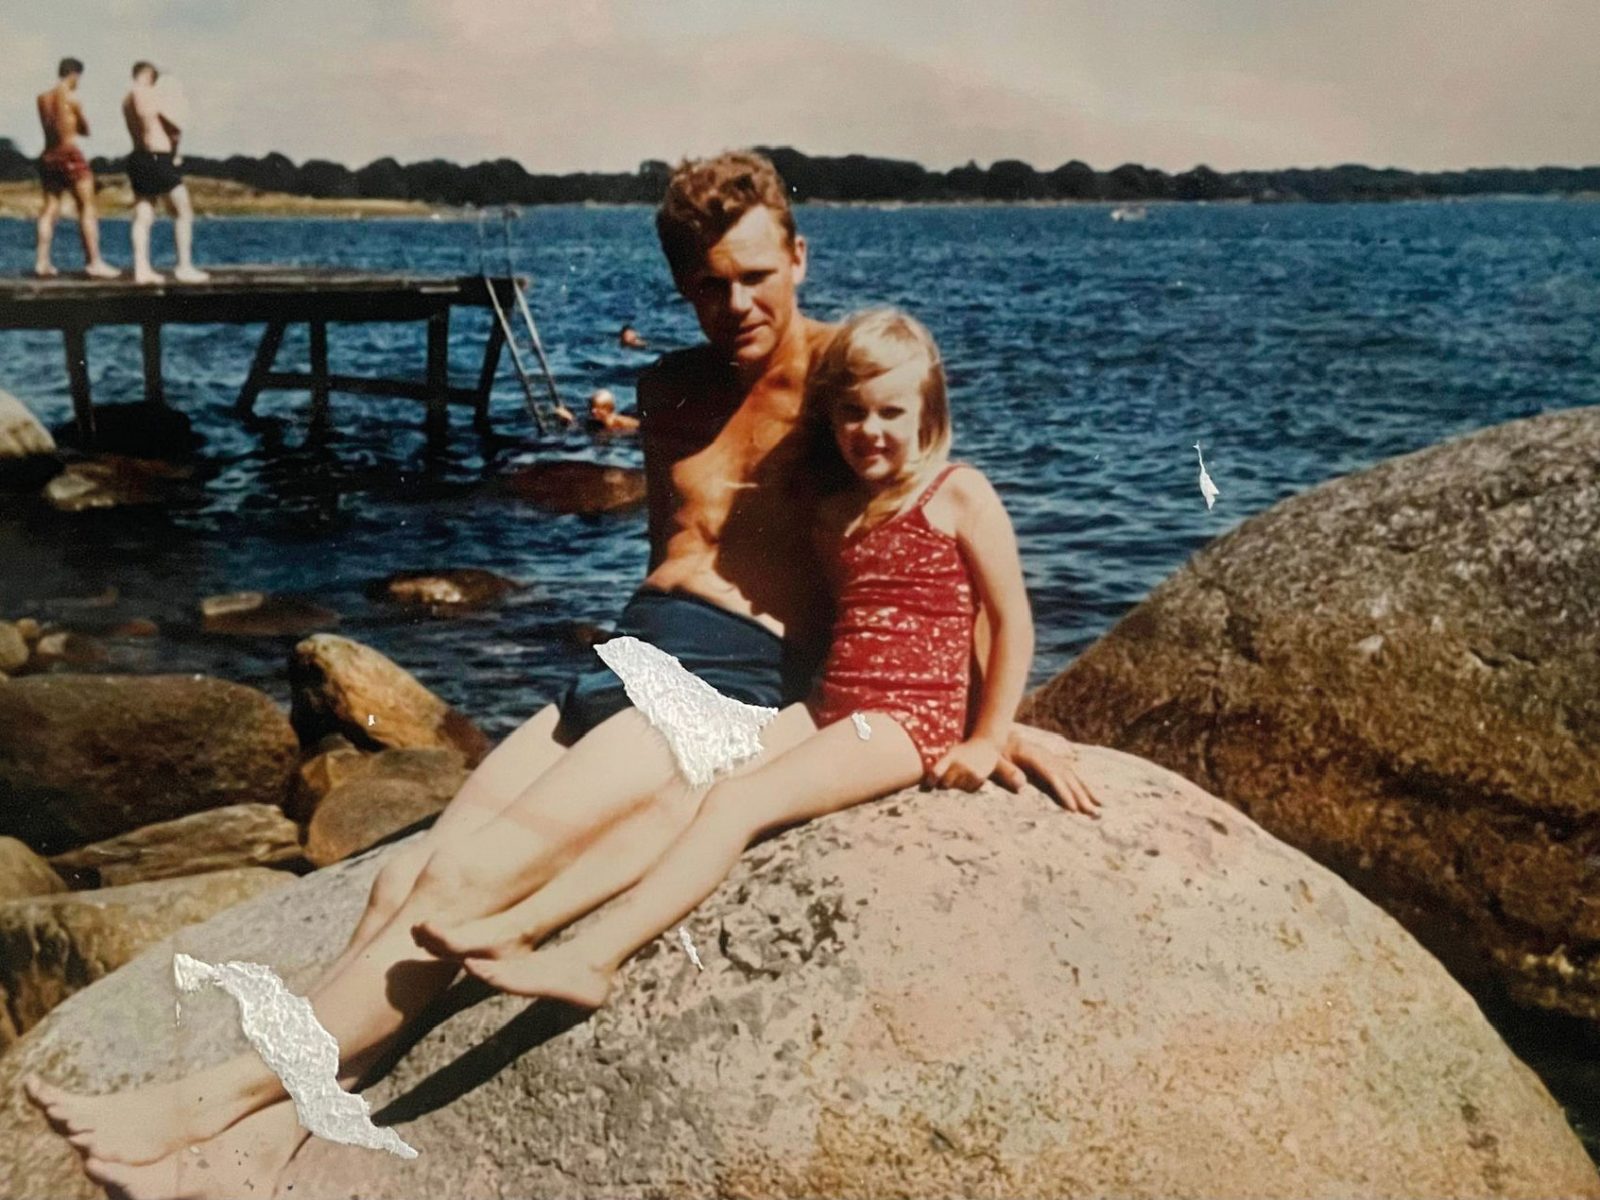 Little girl in red swimsuit, Ingela Johansson, sits with man in trunks, her father, on a large rock by lake.